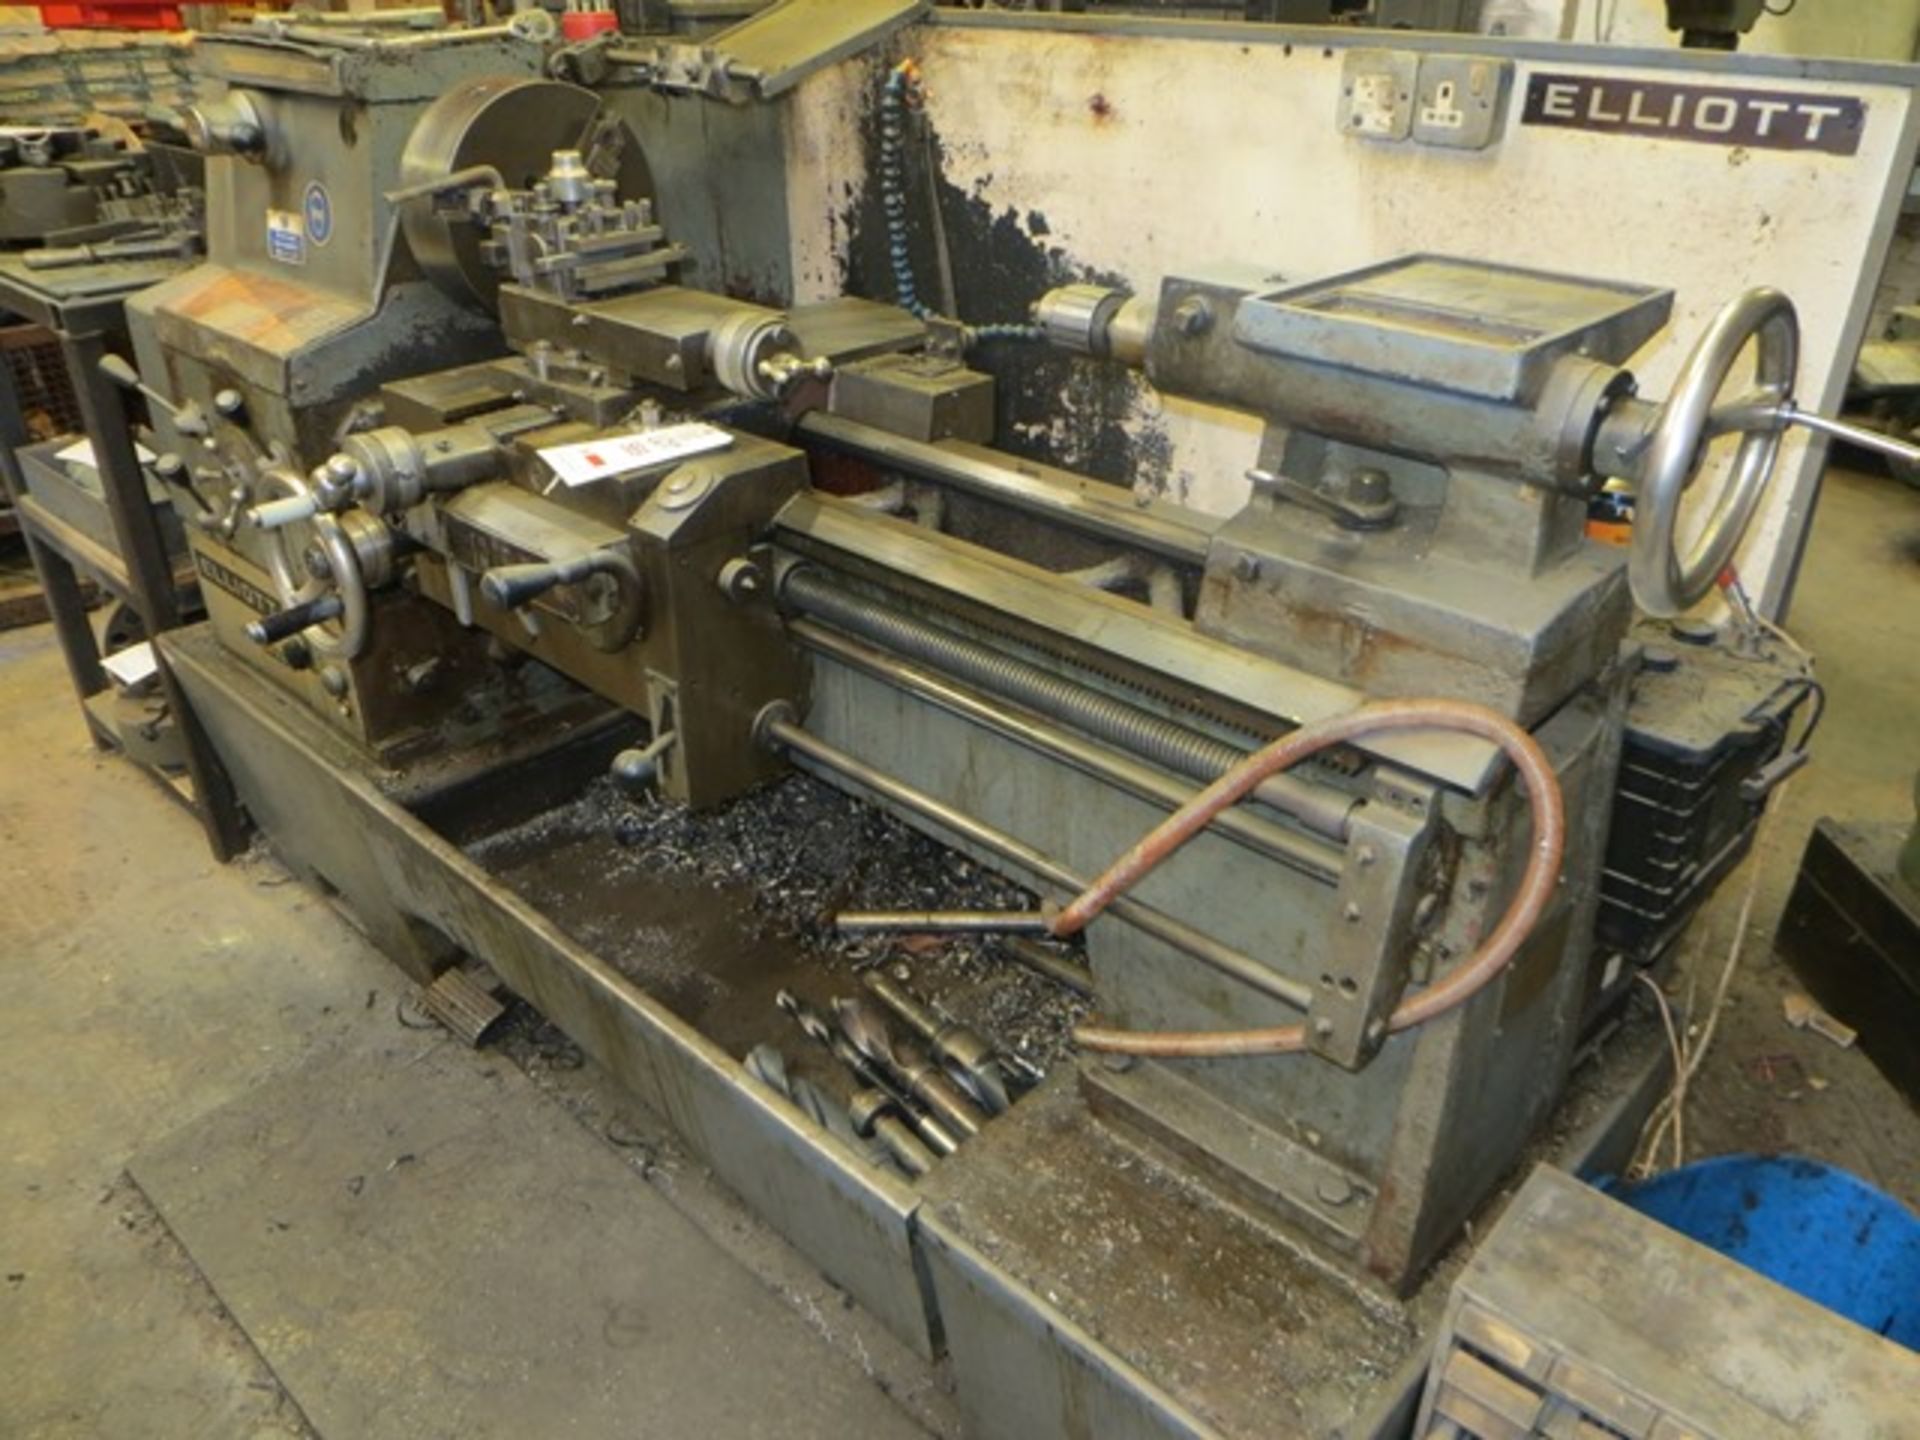 Elliot Omni speed gap bed lathe model M10-300 c/w tailstop 700mm gap between centres c/w spare chuck - Image 2 of 4